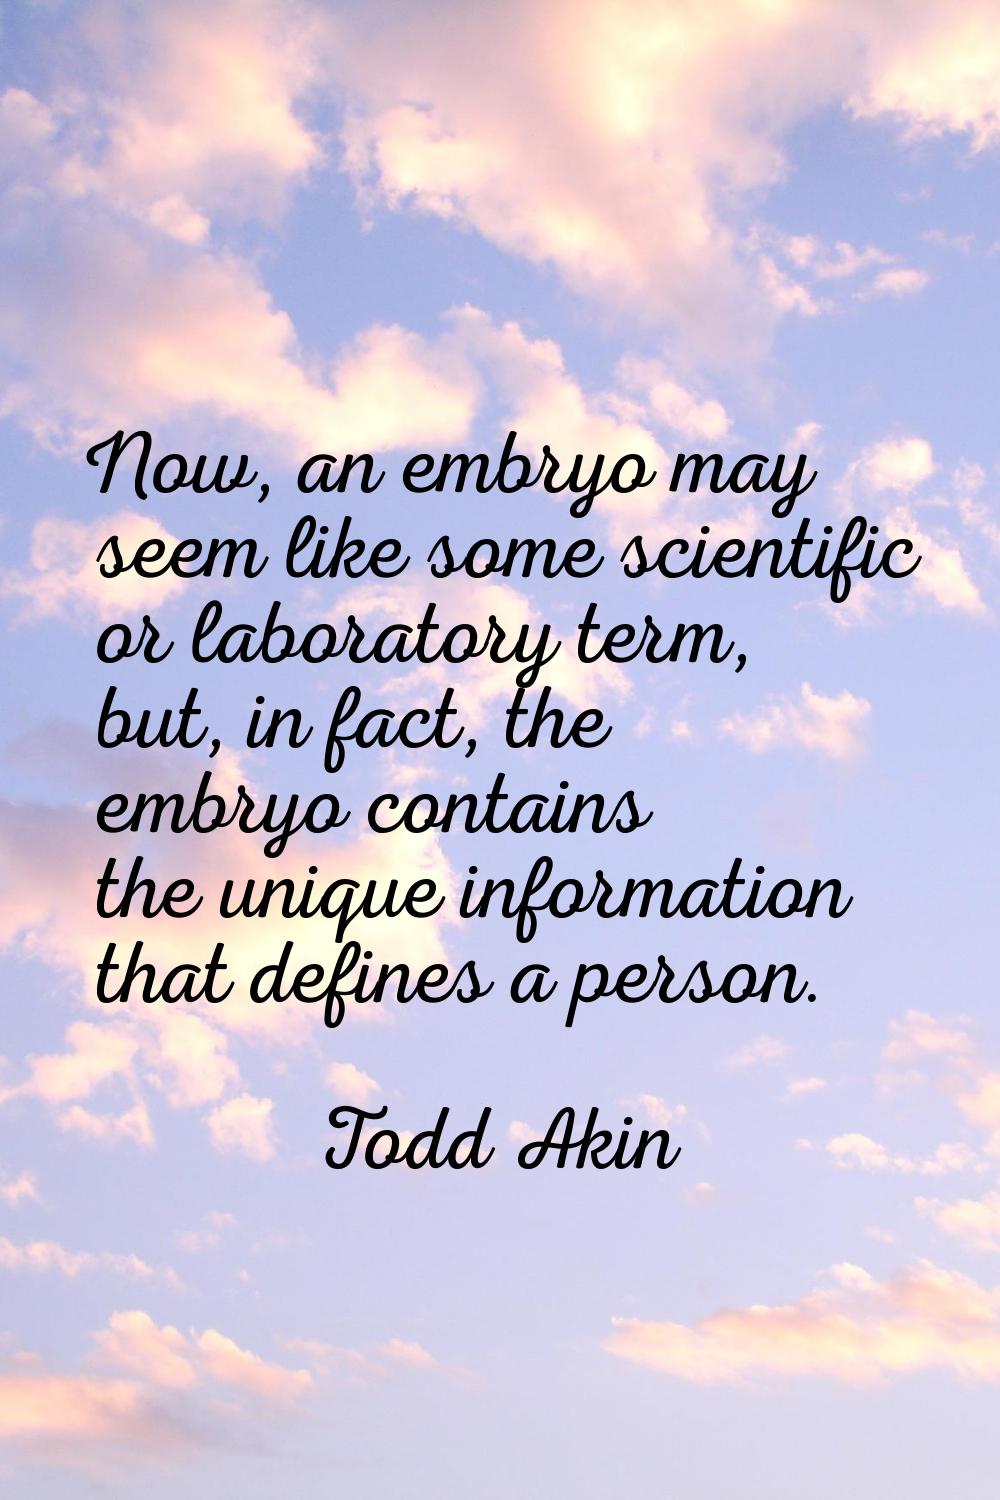 Now, an embryo may seem like some scientific or laboratory term, but, in fact, the embryo contains 